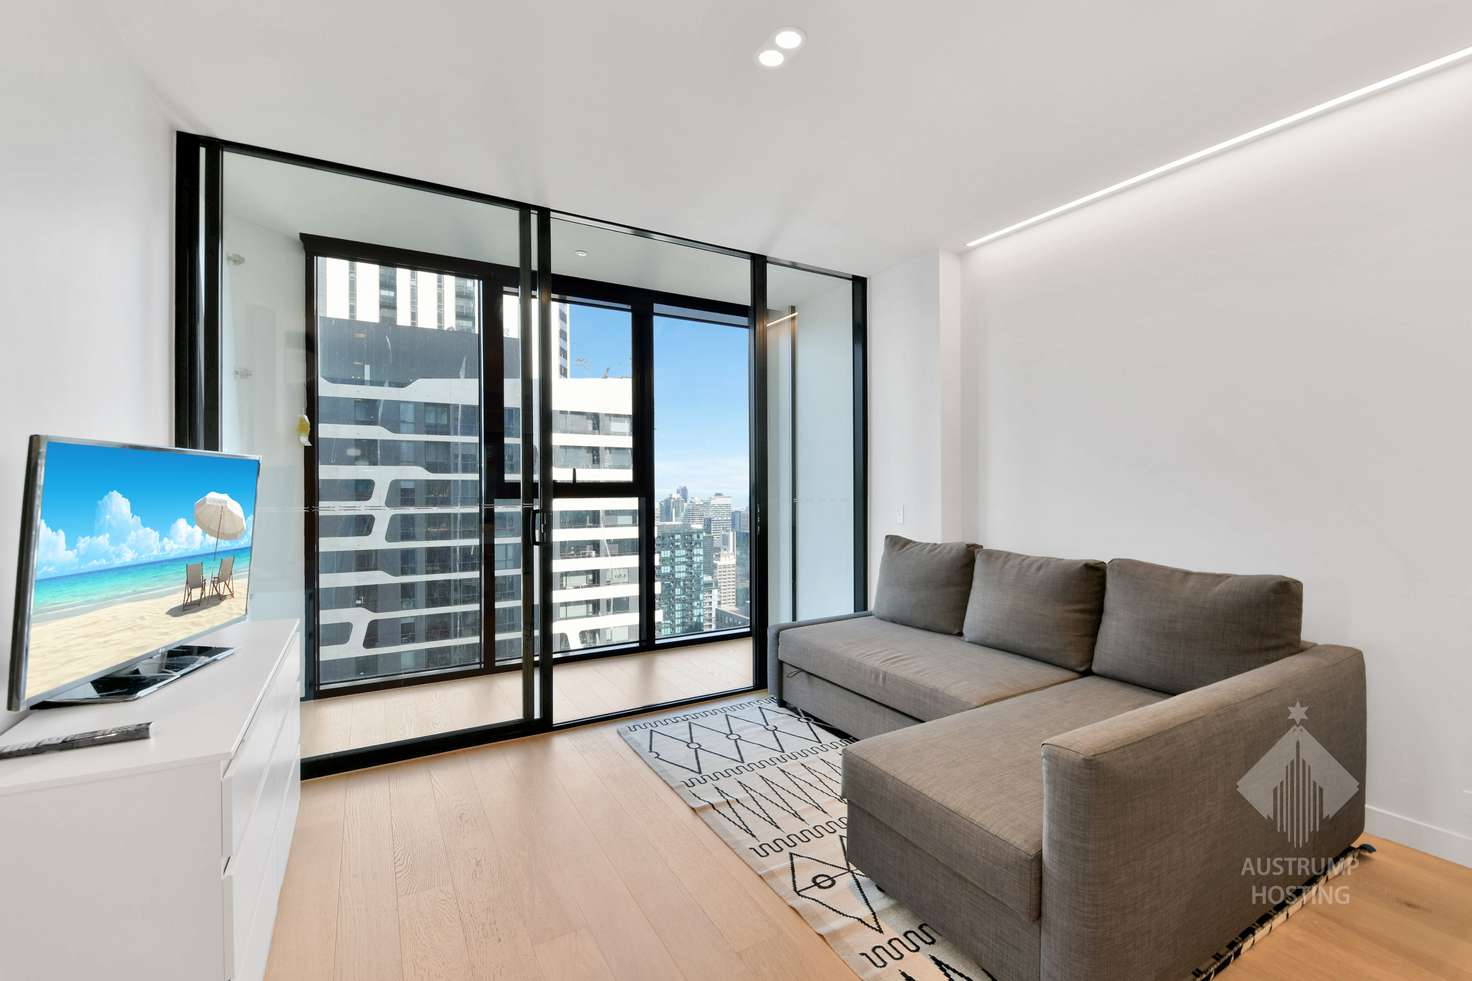 Main view of Homely apartment listing, 5104/442 Elizabeth Street, Melbourne VIC 3000